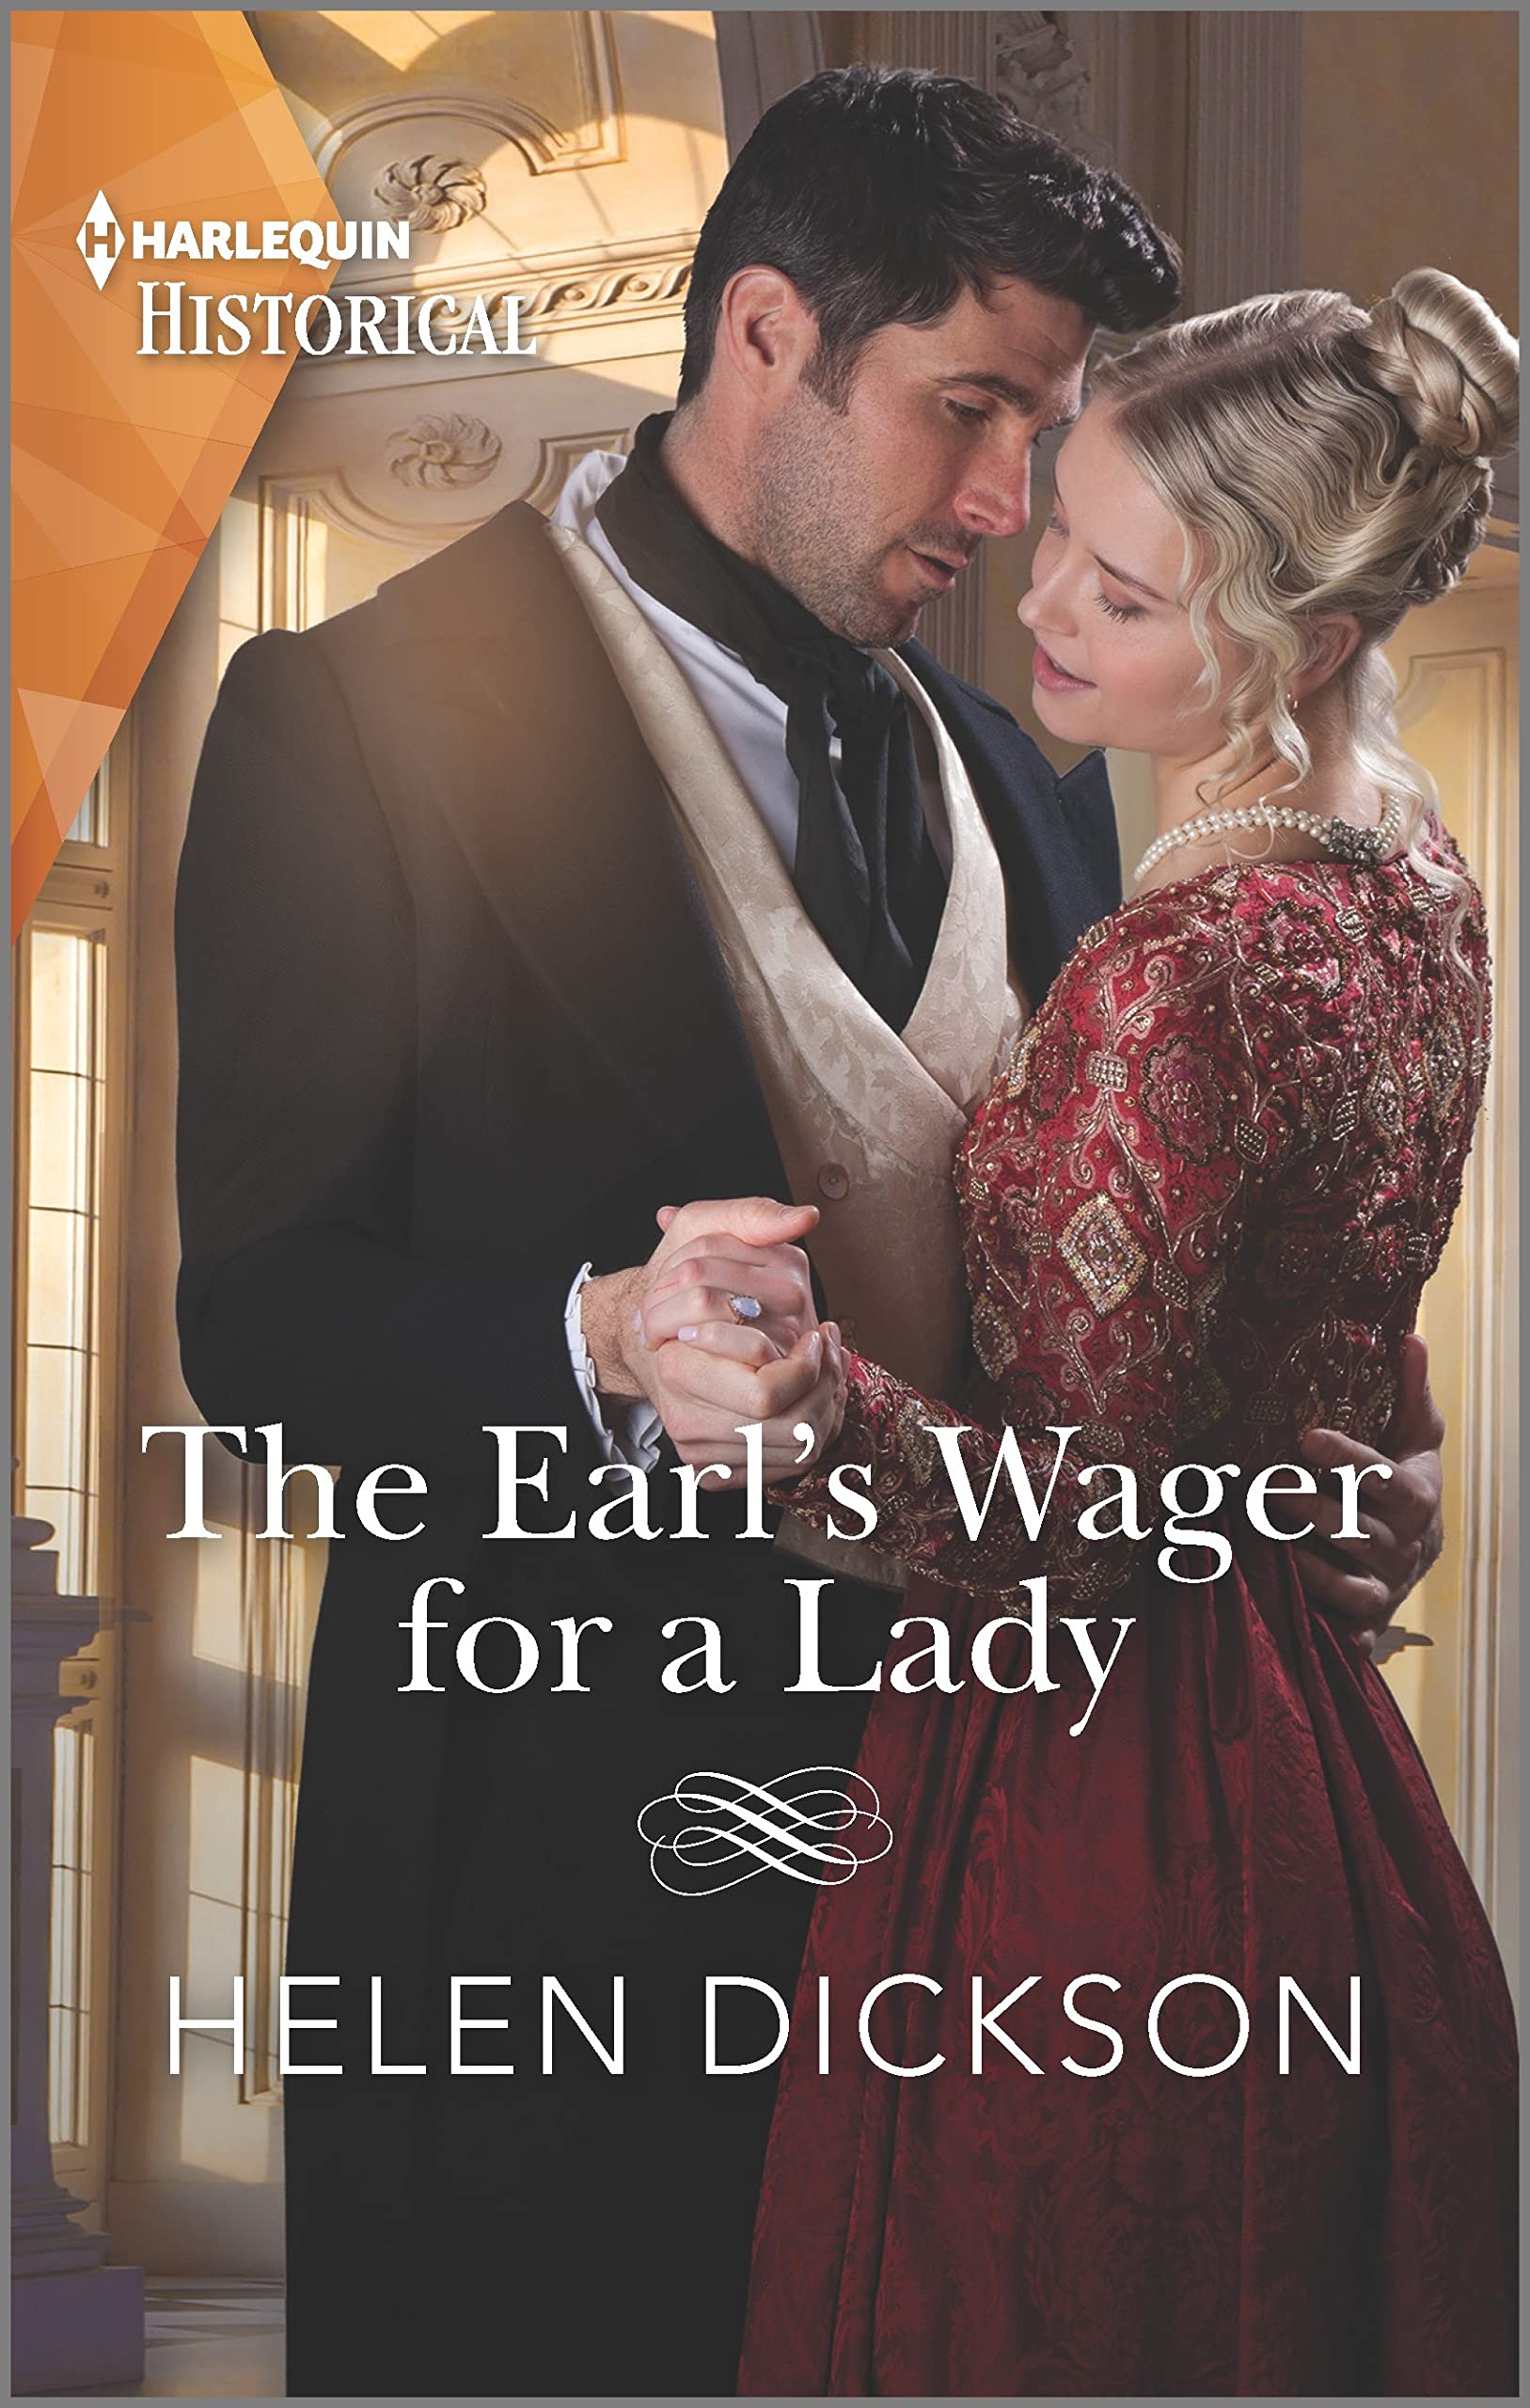 The Earl’s Wager for a Lady